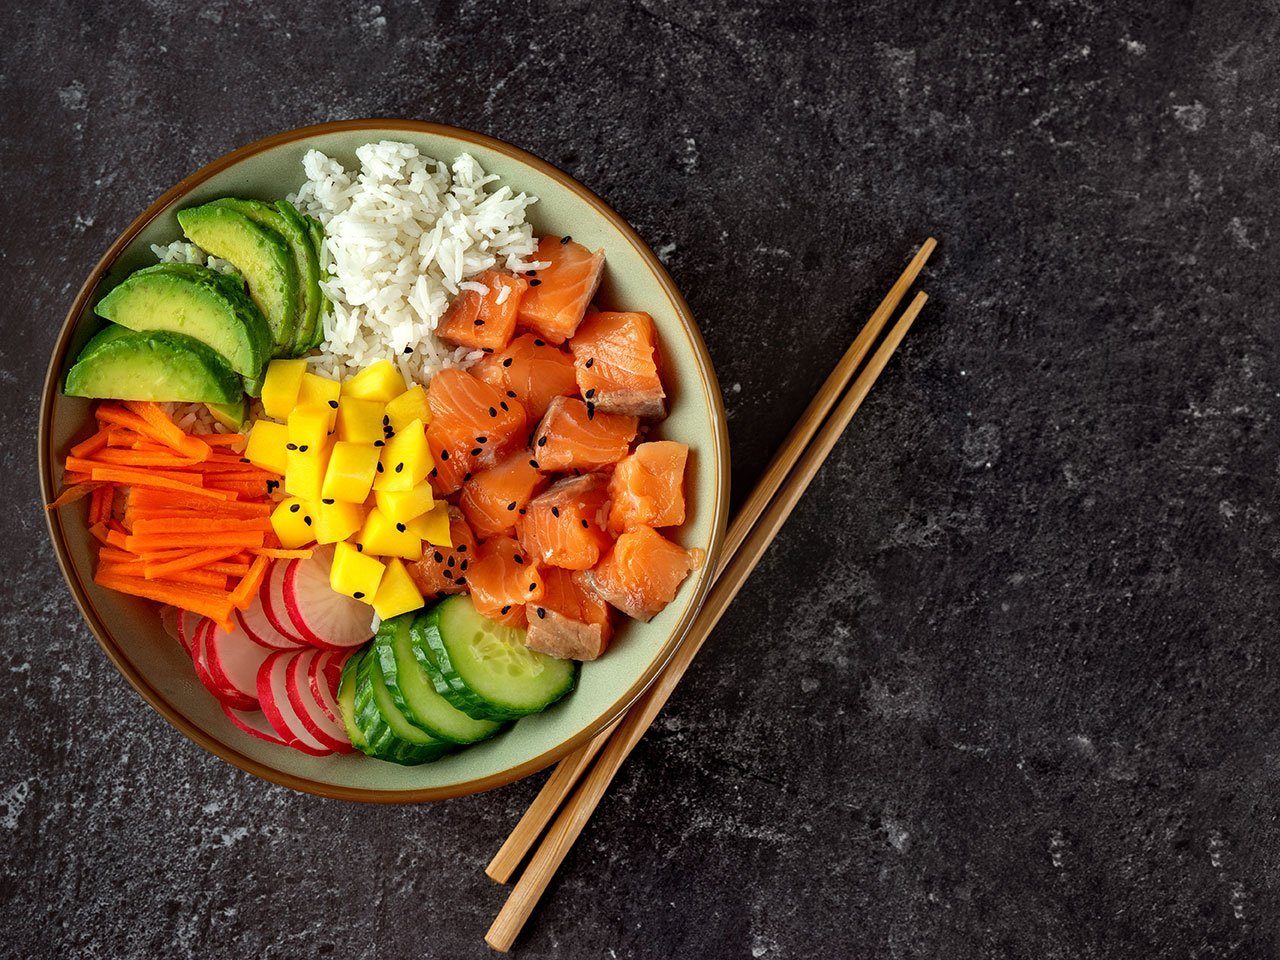 Top View Of Poke Bowl With Salmon And Avocado On Dark Background